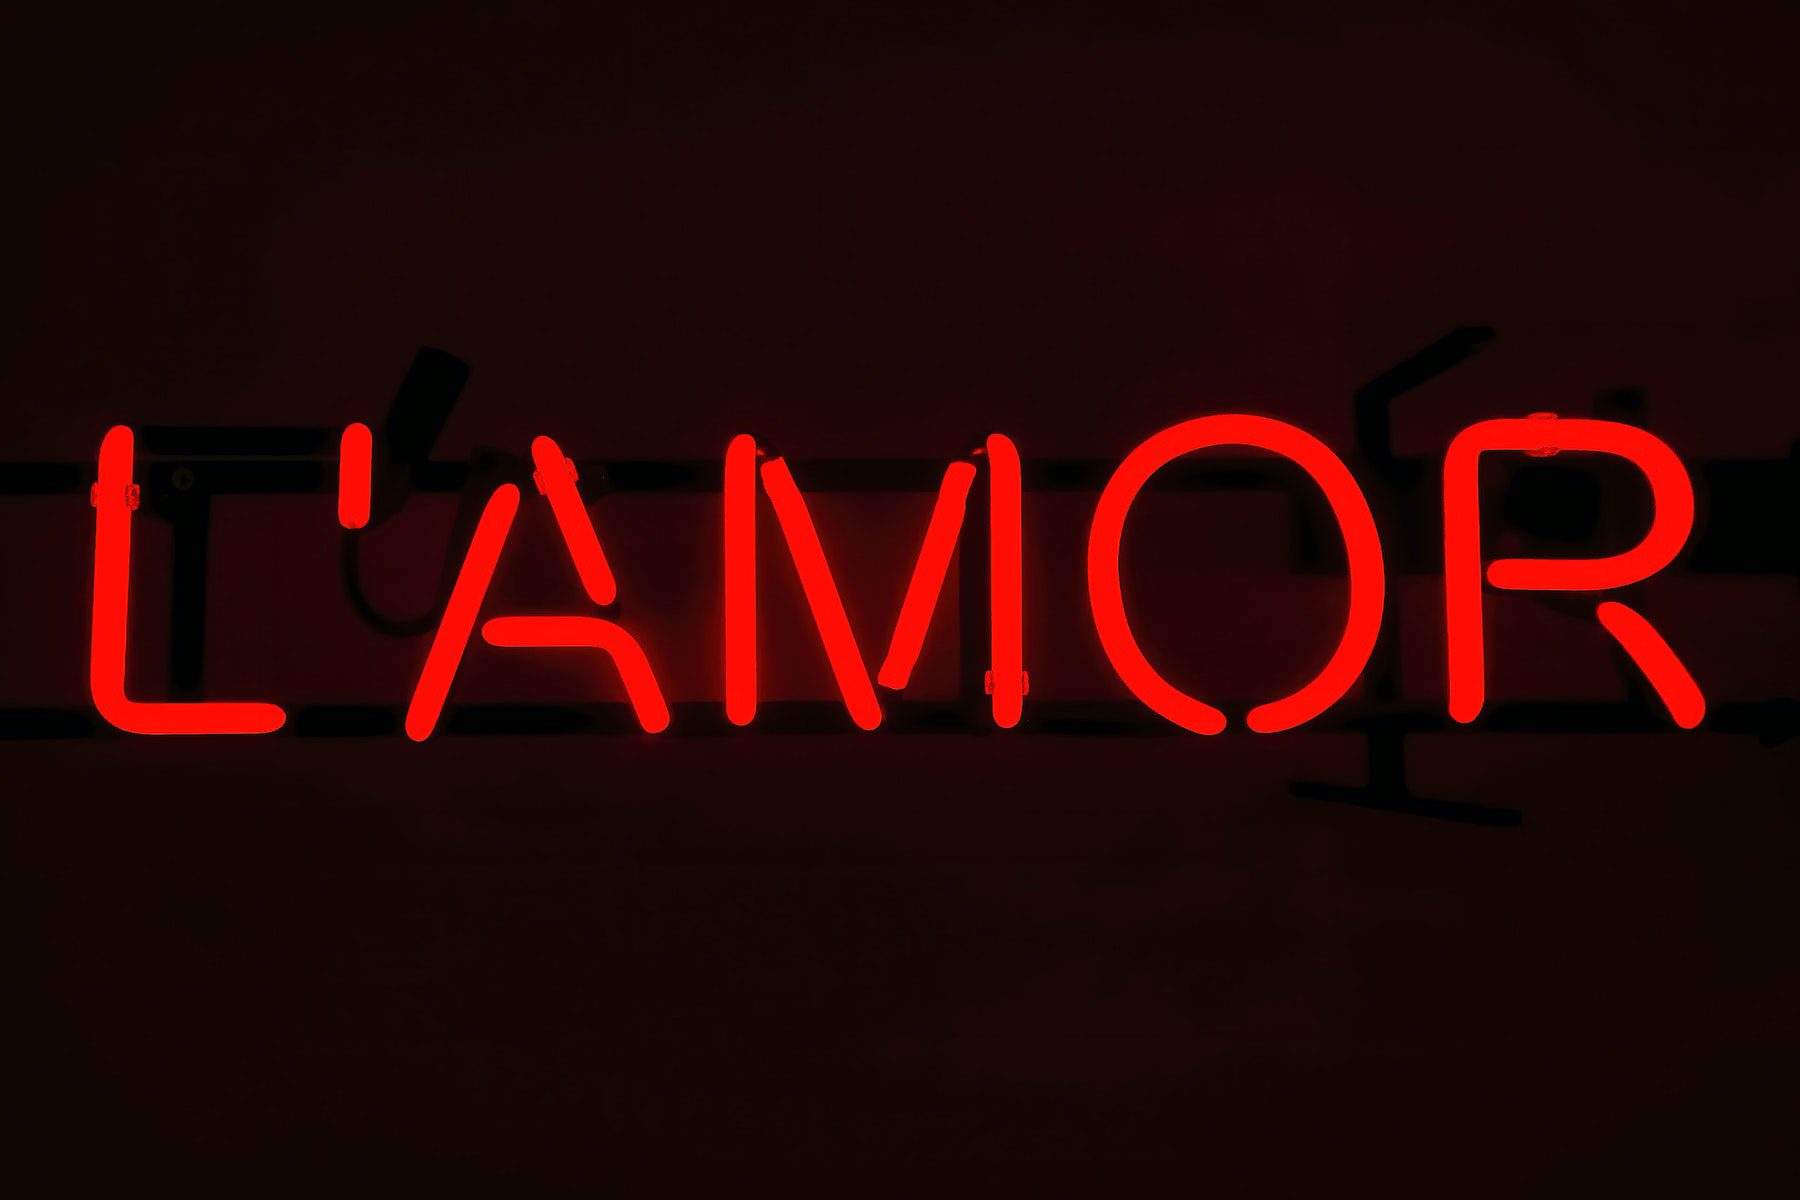 The French word "L'amor" spelled out in red neon light in a dark room